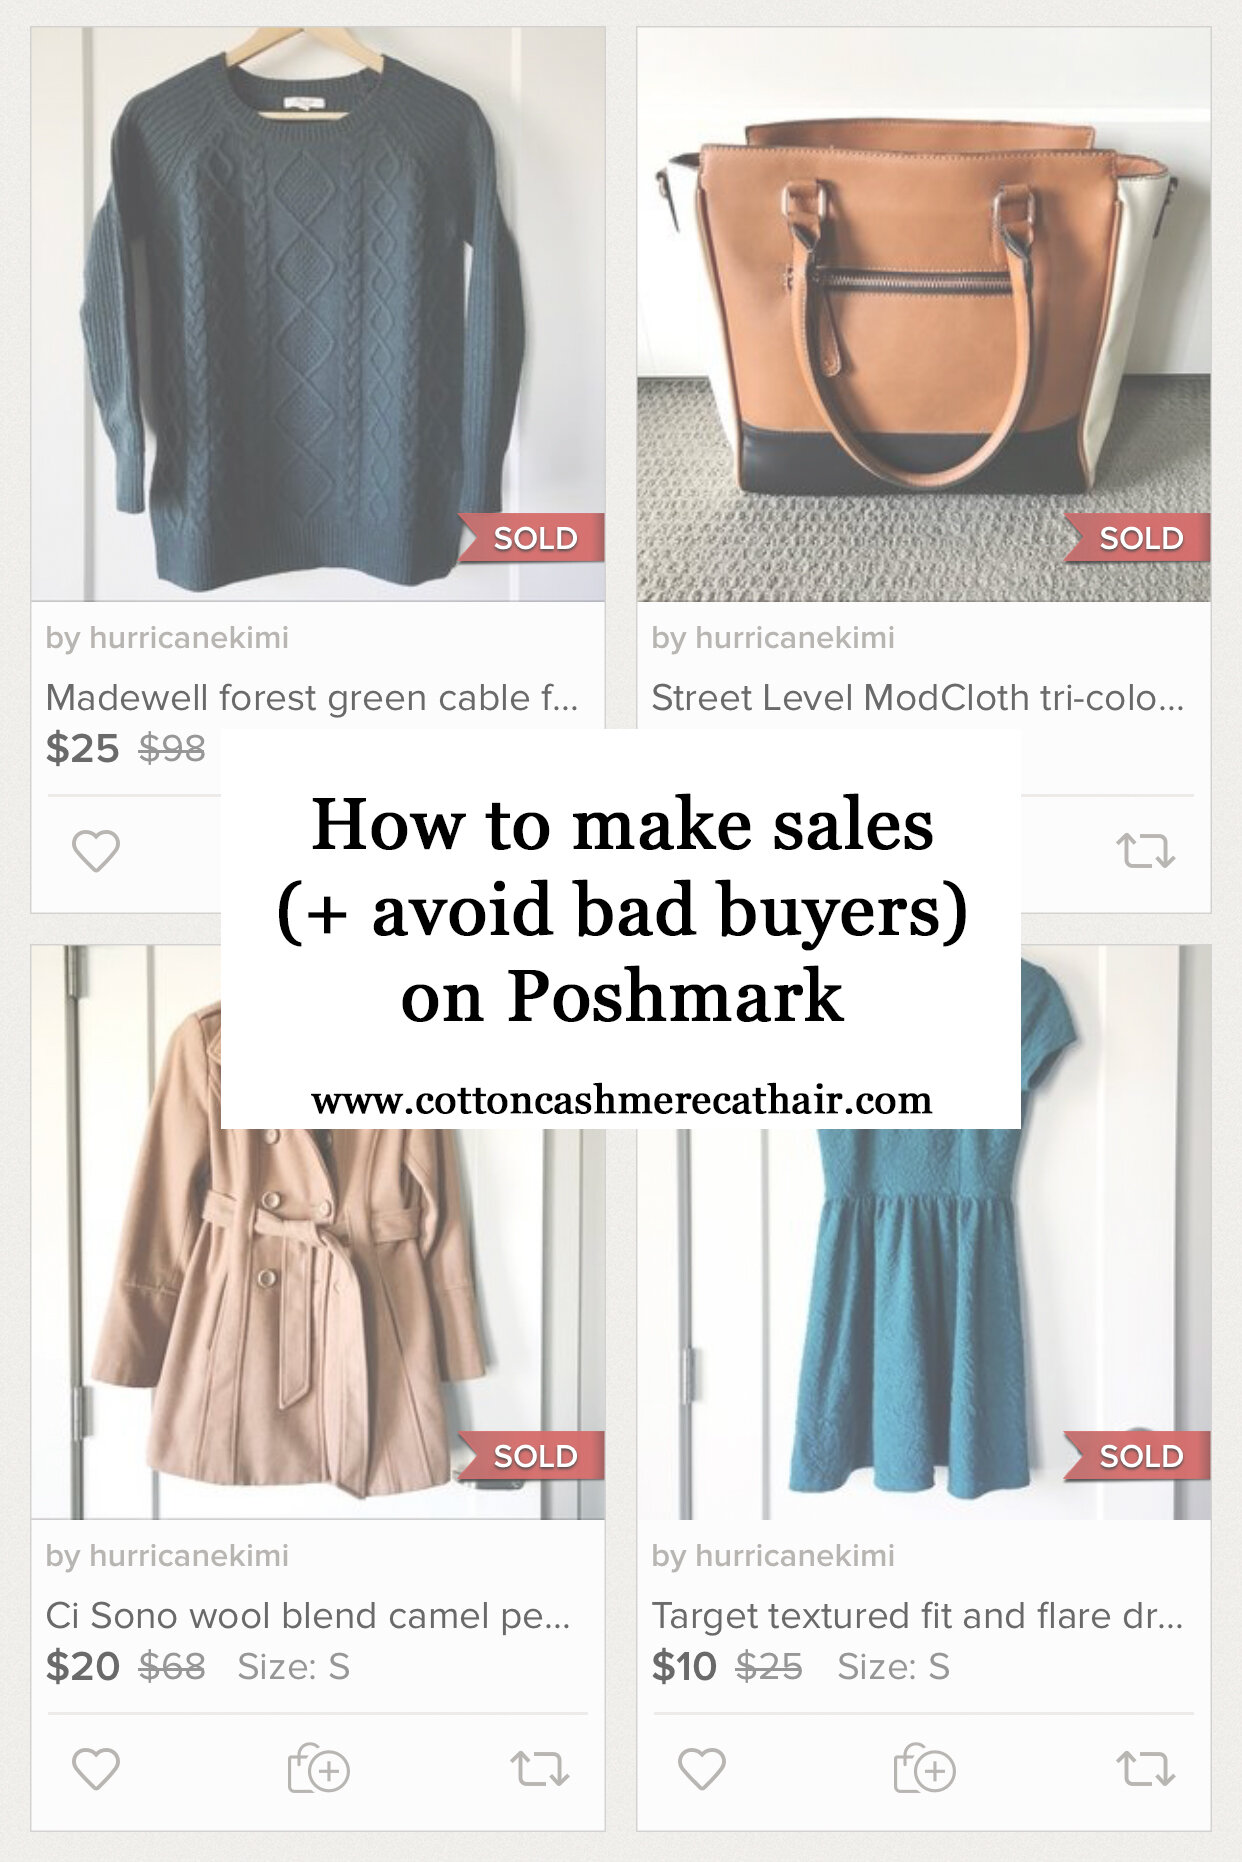 6 Steps for Making Your First Sale on Poshmark